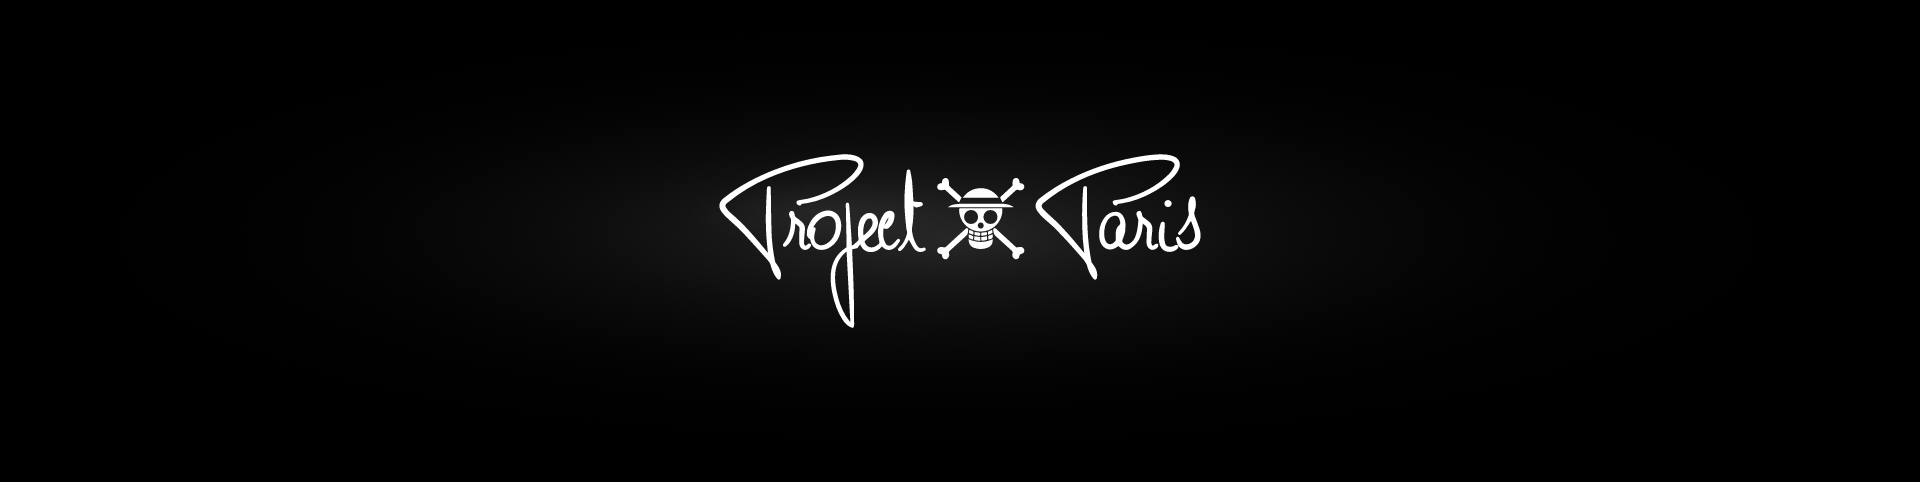 One Piece clothing - Project X Paris, project one piece 